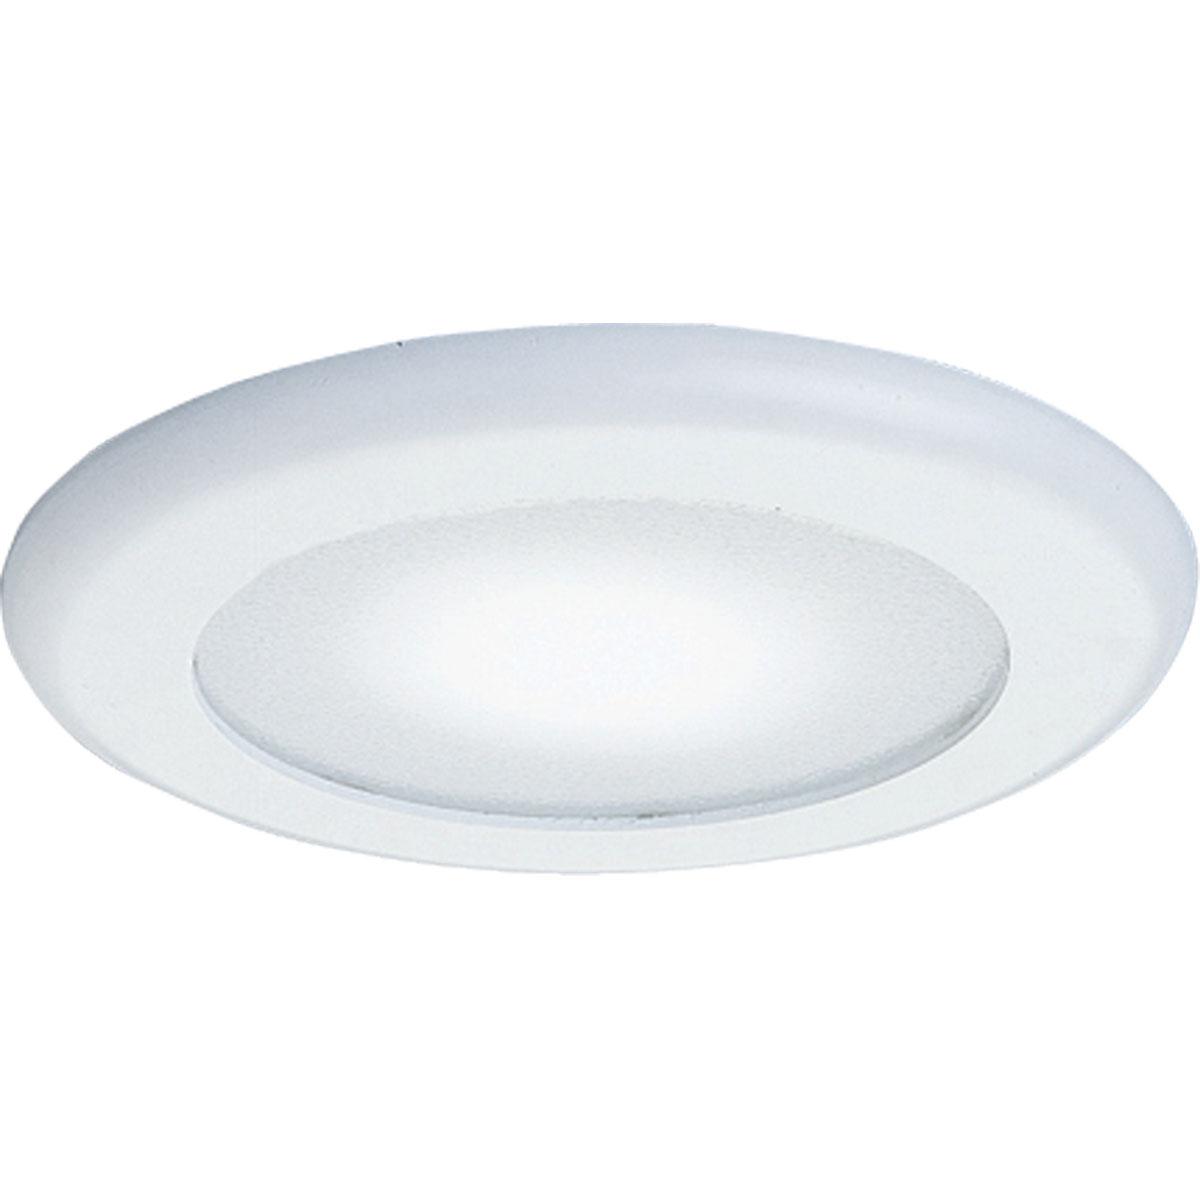 Hubbell P8008-60 6" Flat Albalite Trim with Reflector in a bright white finish with white glass and non-metallic flange. Wet location listed.  ; Flat Albalite glass lens. ; Bright white finish. ; No light leaks around trim flange.